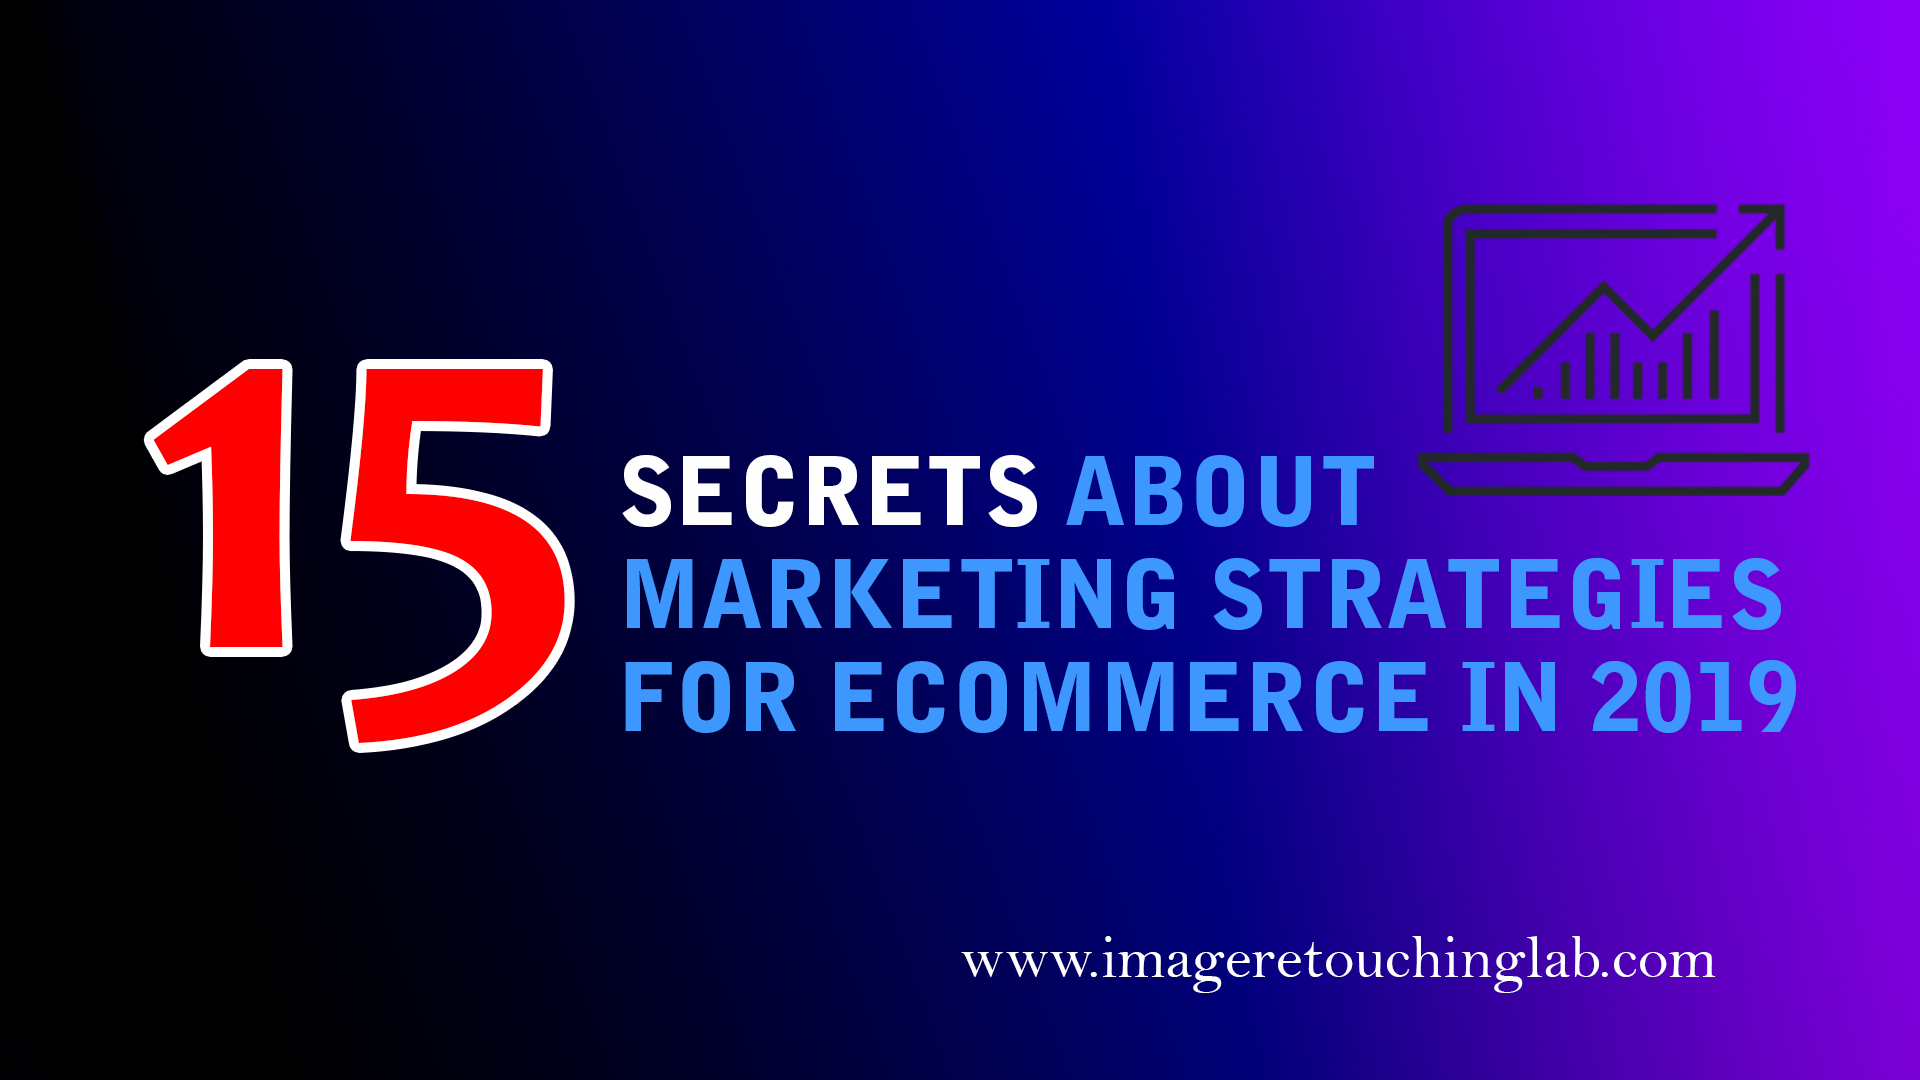 15 Secrets About Marketing Strategies For Ecommerce in 2019 That Nobody Will Tell You